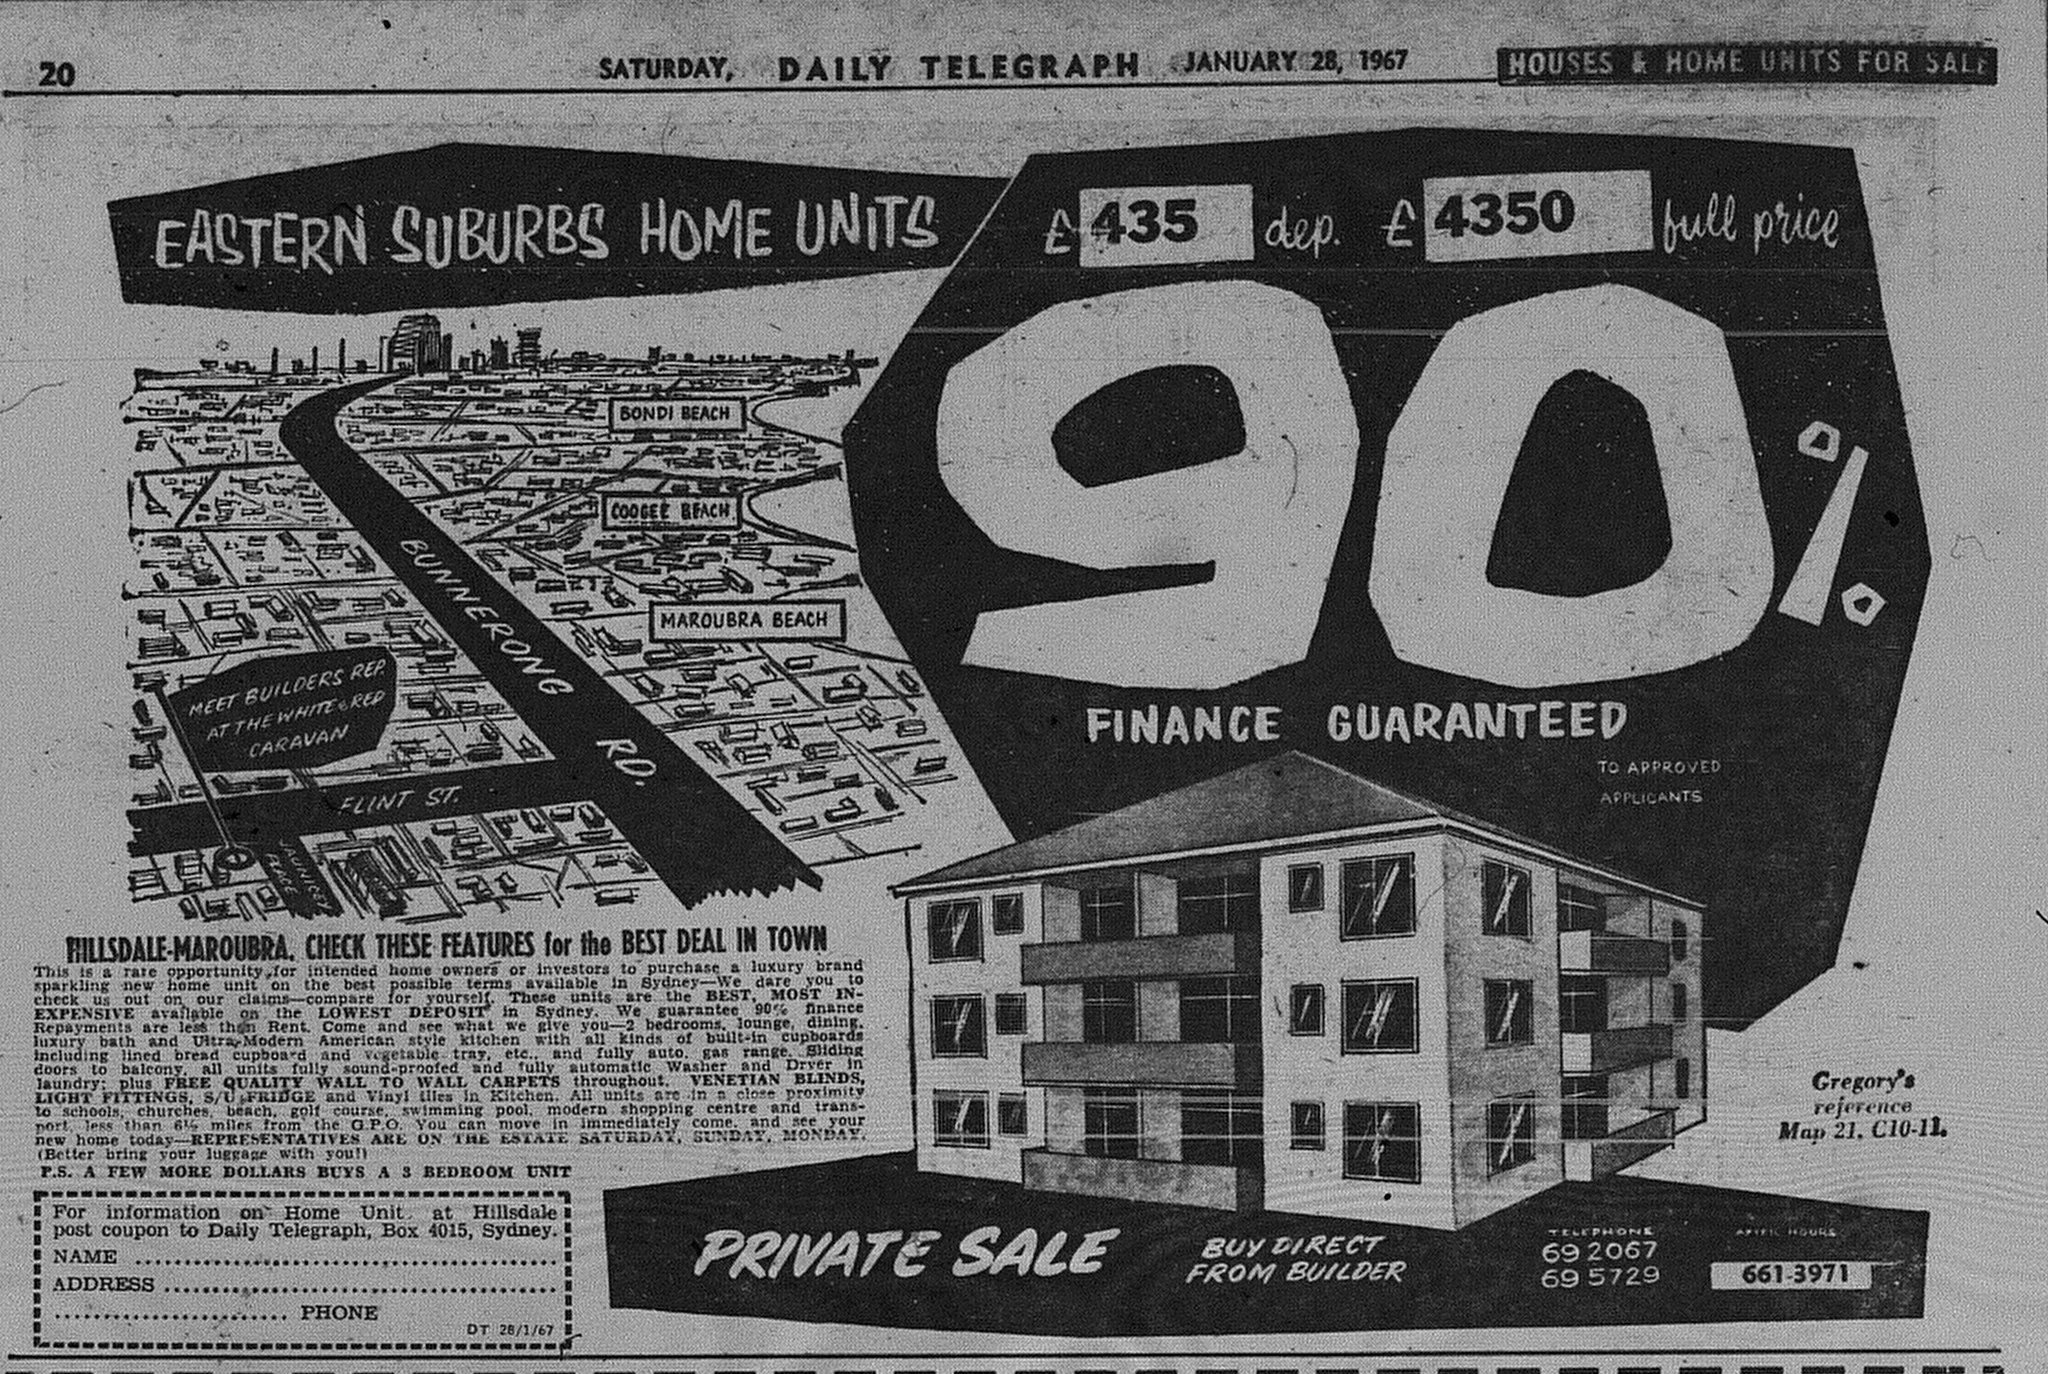 Eastern Suburbs Home Units Ad January 28 1967 daily telegraph 20